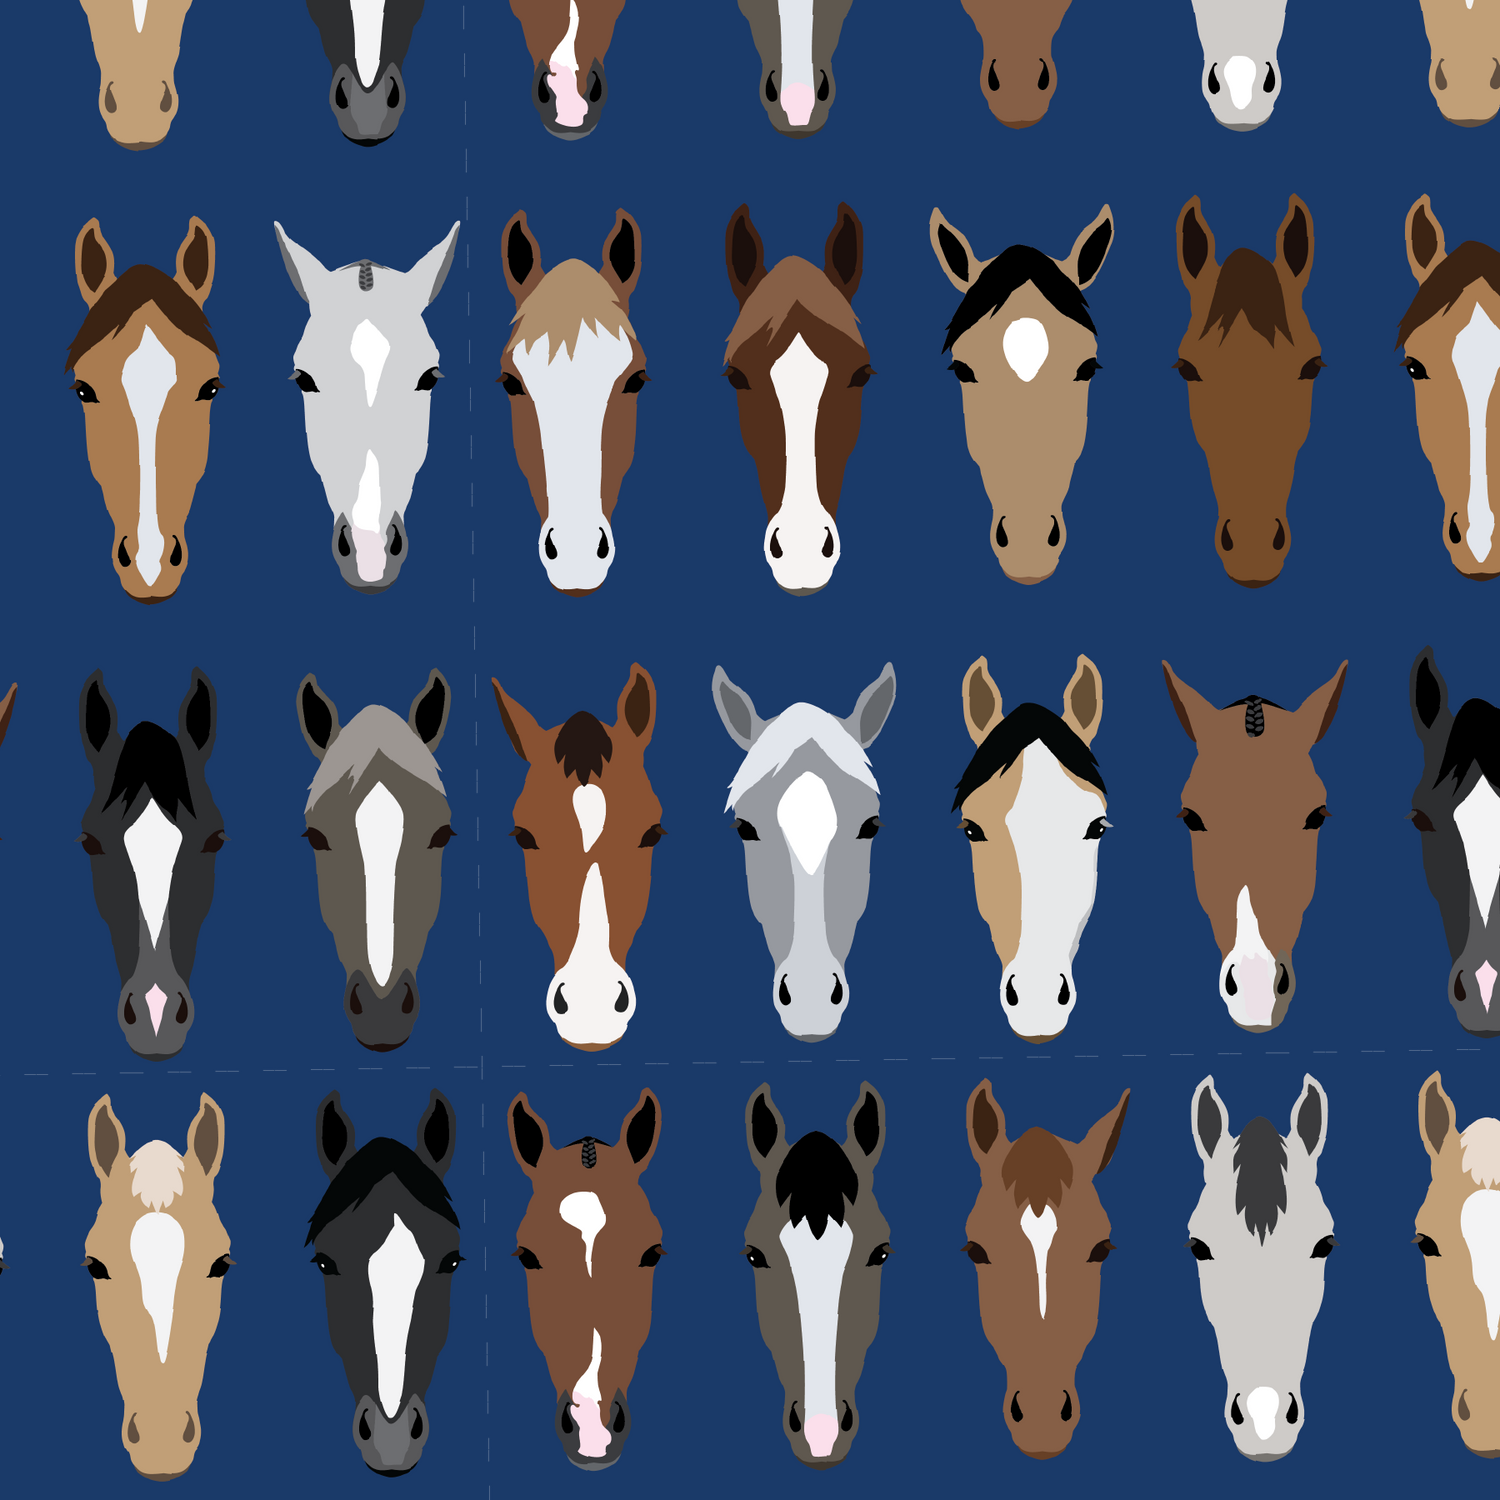 Horse Faces On Navy